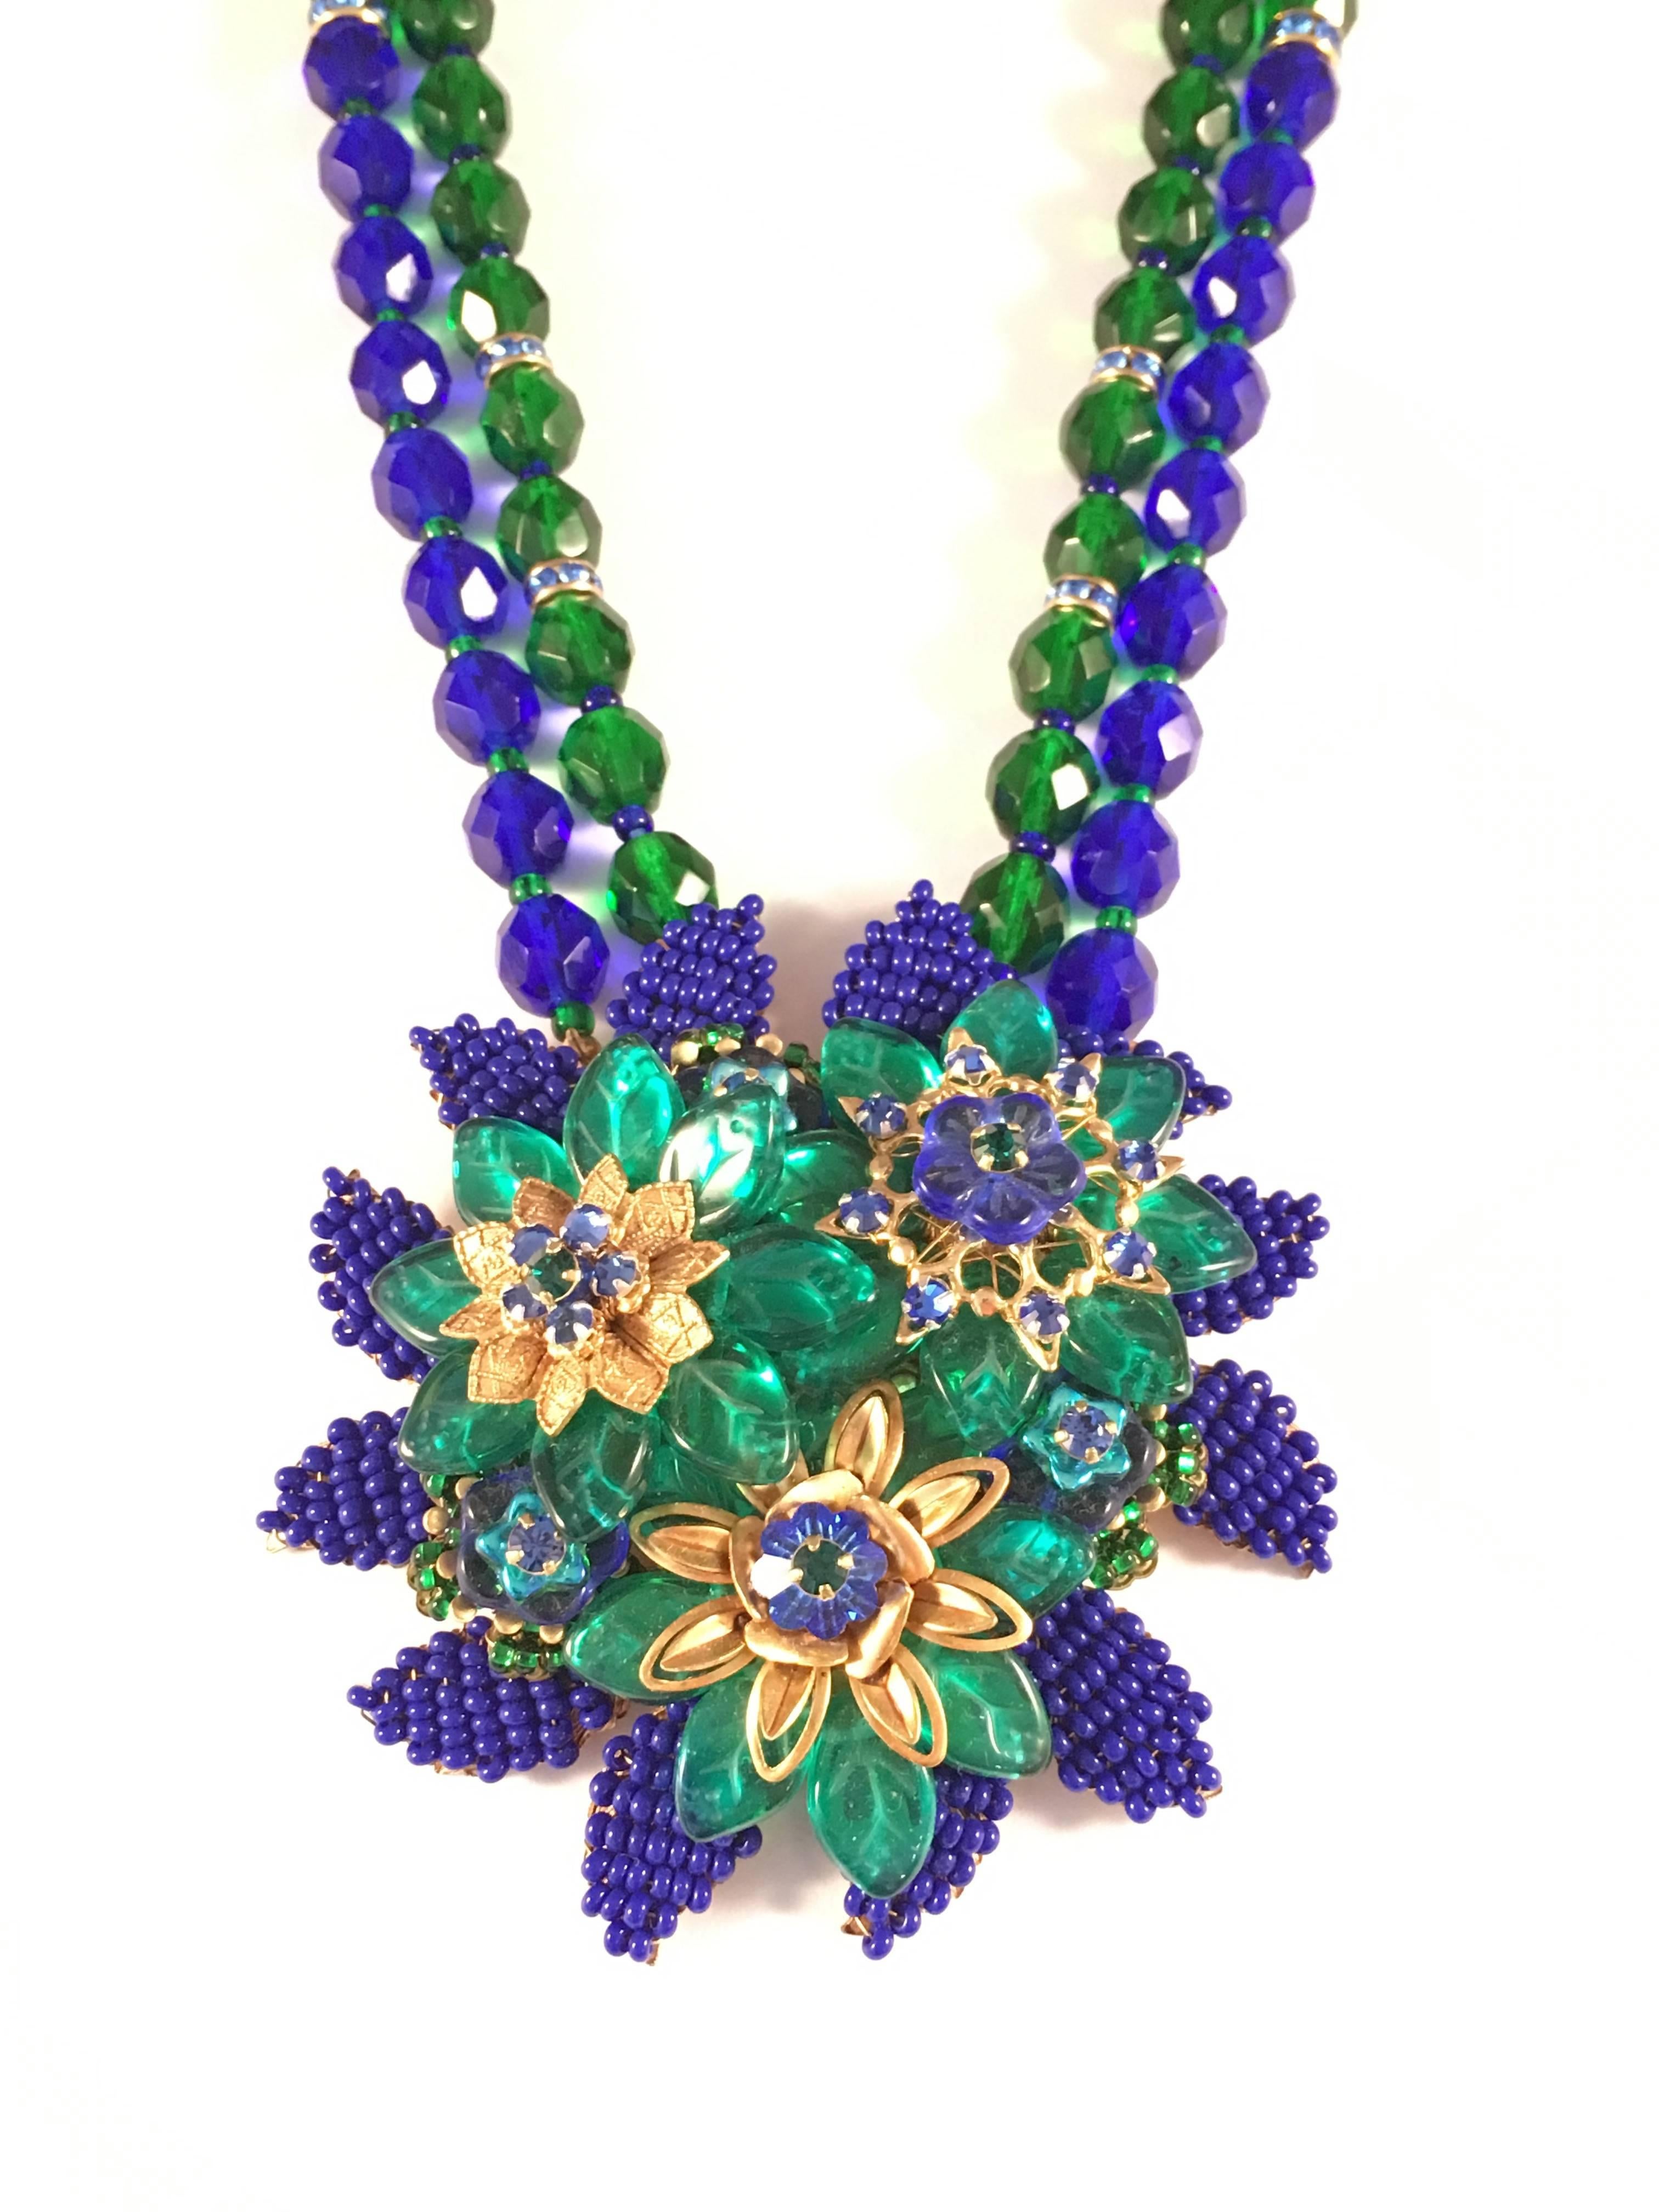 Women's Stanley Hagler and Ian St. Gielar Necklace Blue And Green Beaded Flower Pendant For Sale